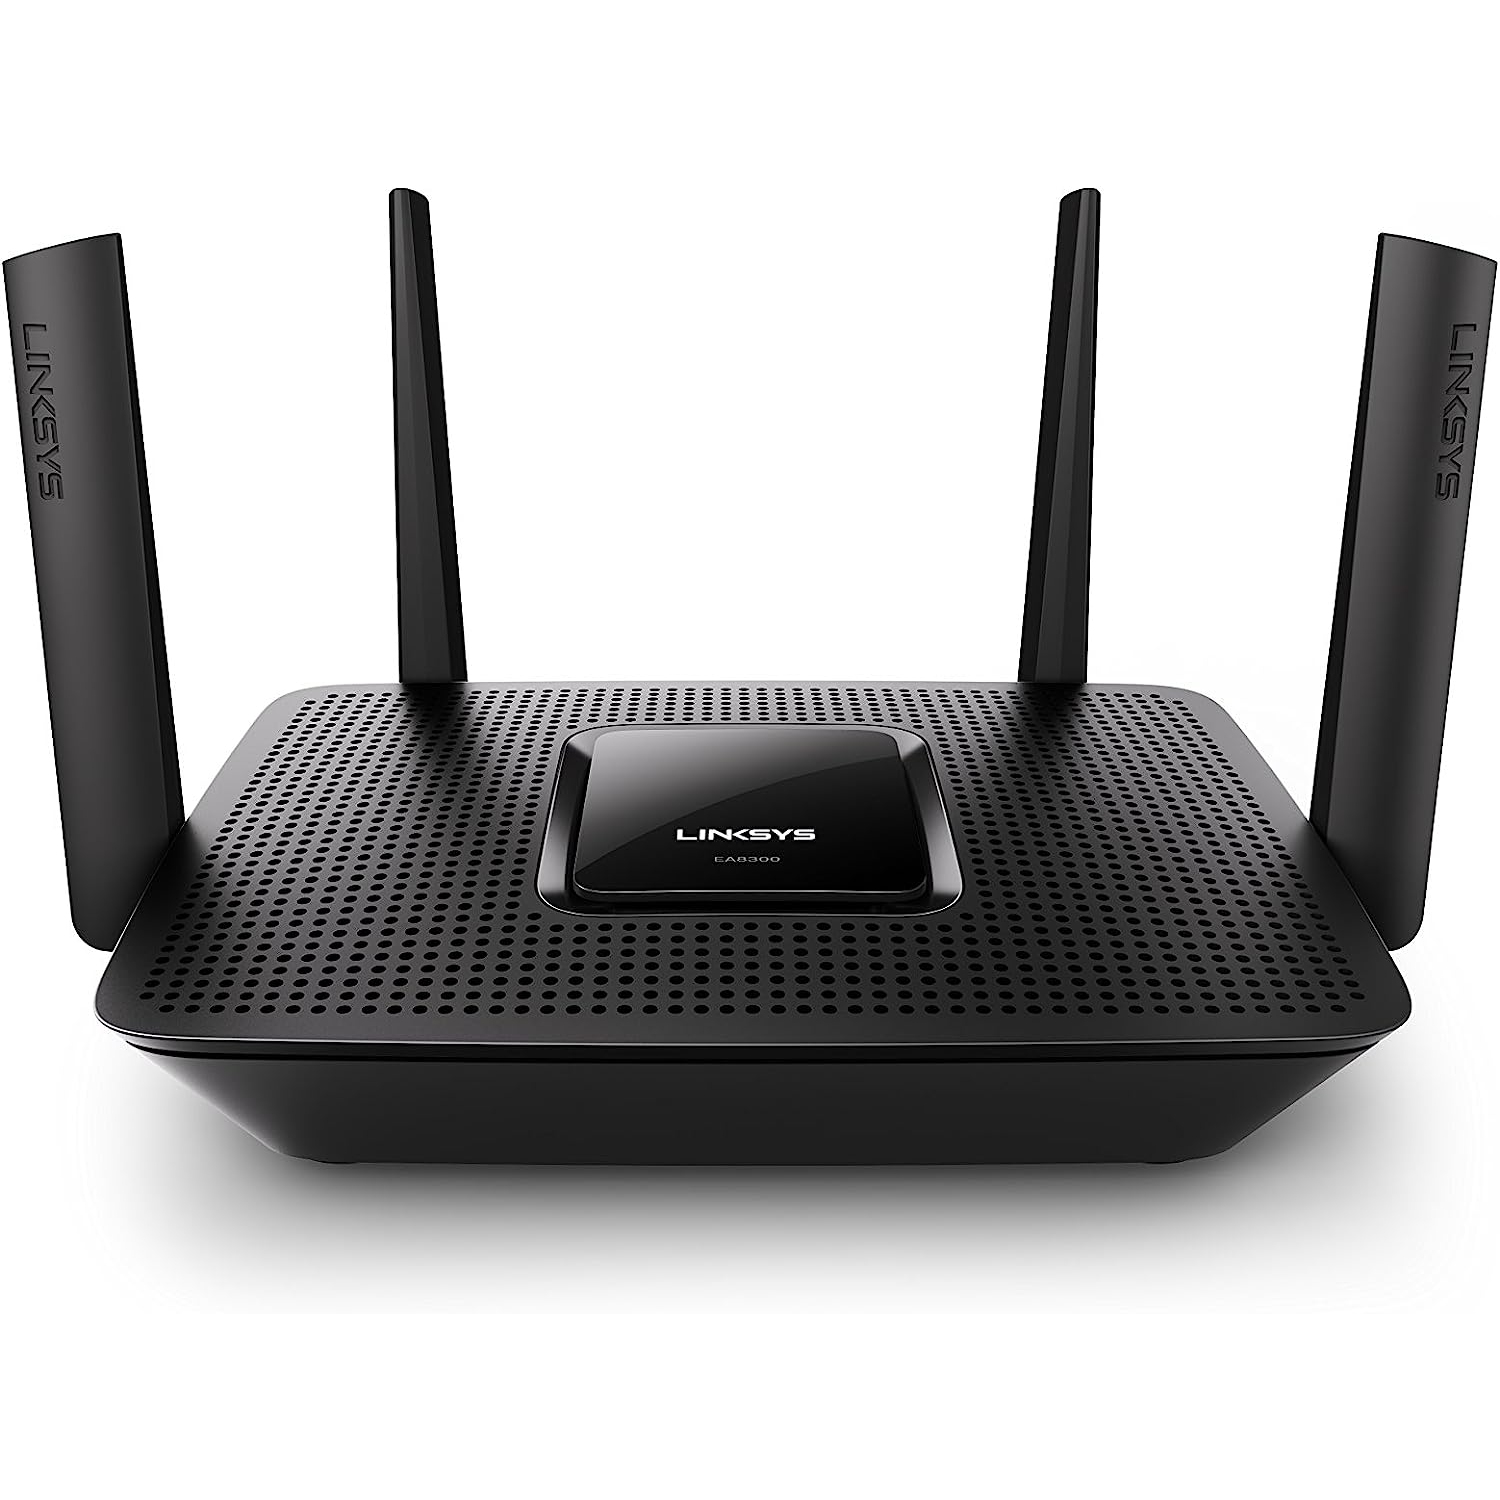 Refurbished (Excellent) - Linksys - Max-Stream AC2200 Tri-Band Wi-Fi Router (EA8300) Black